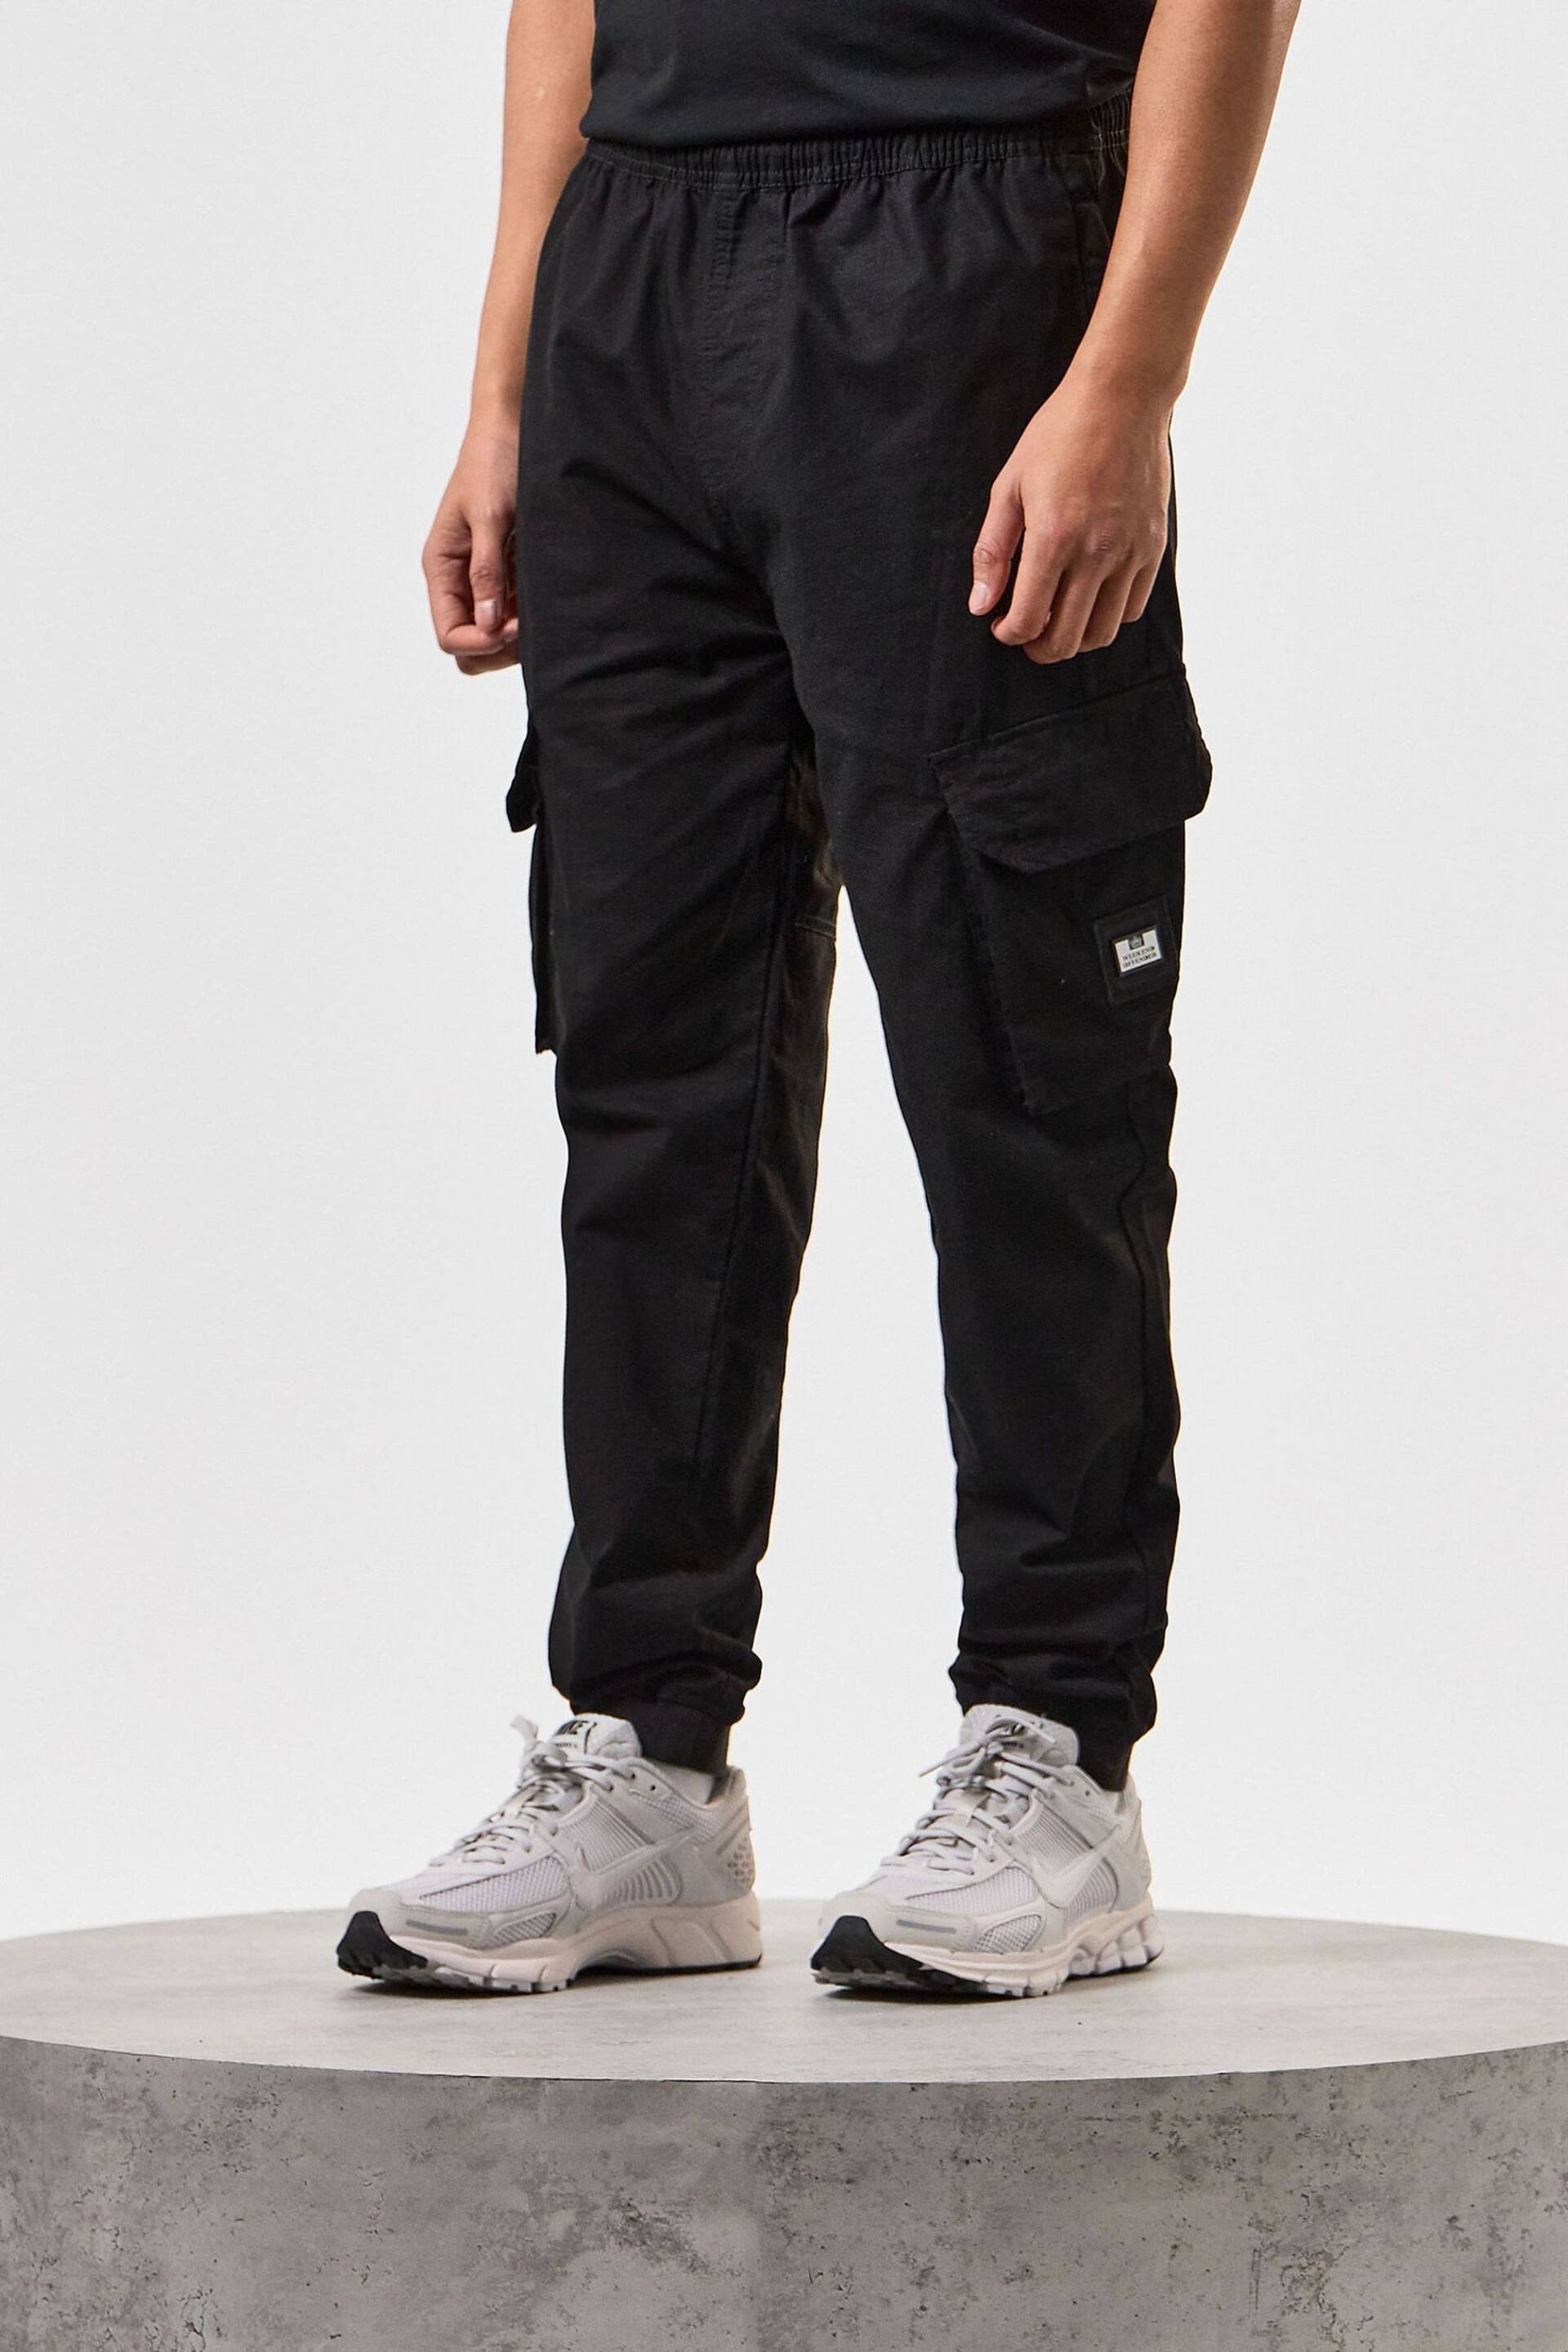 Weekend Offender Pianamo Cargo Trousers - Image 1 of 7